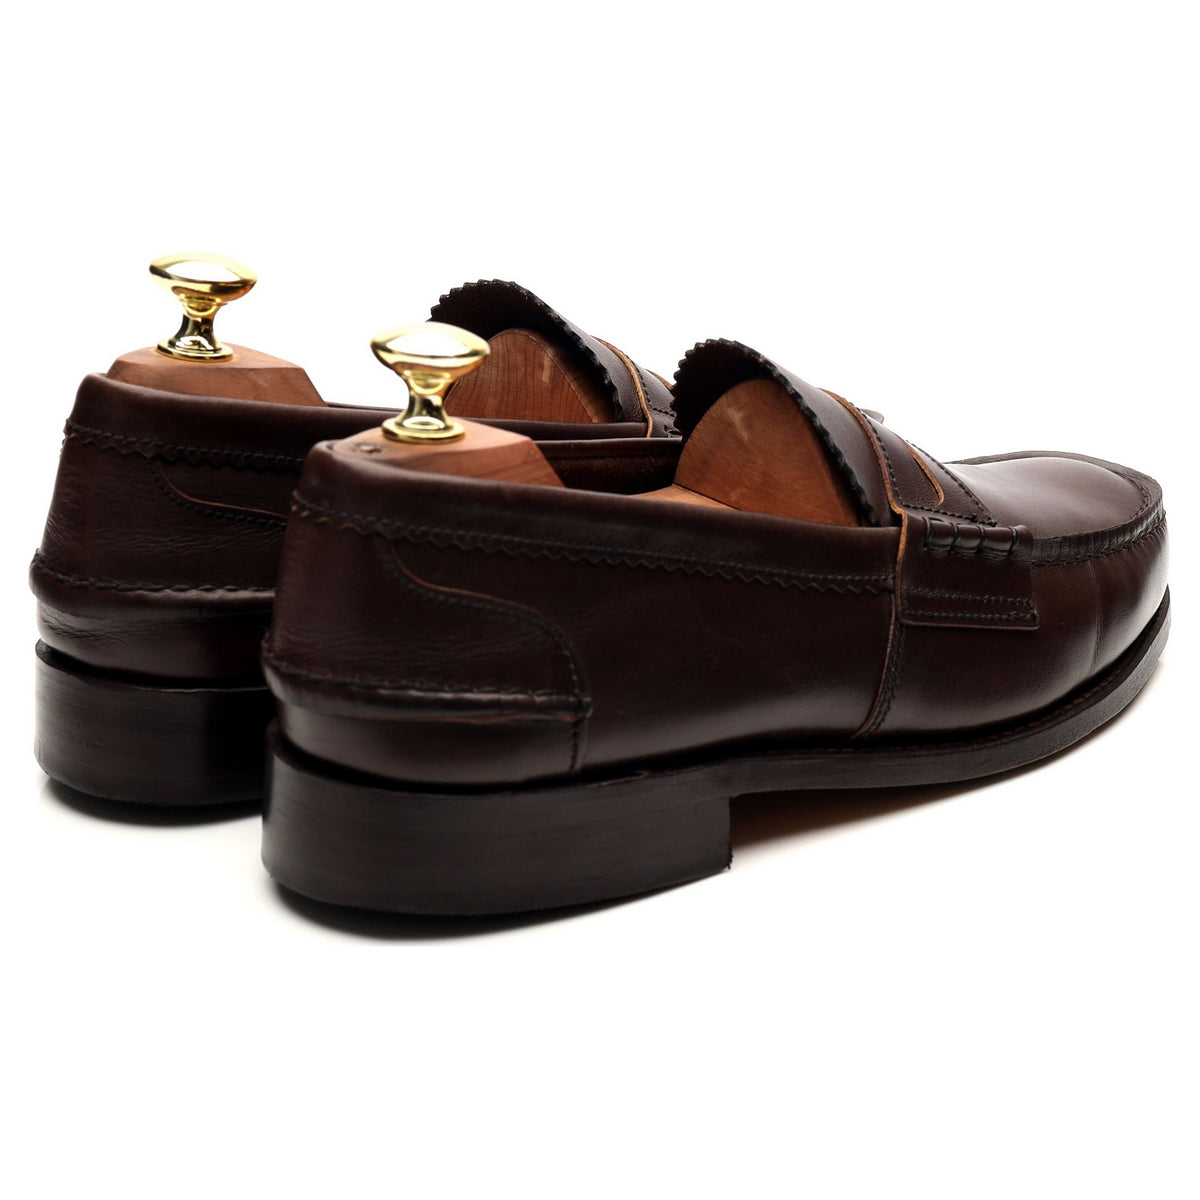 Dark Brown Leather Loafers UK 7.5 F